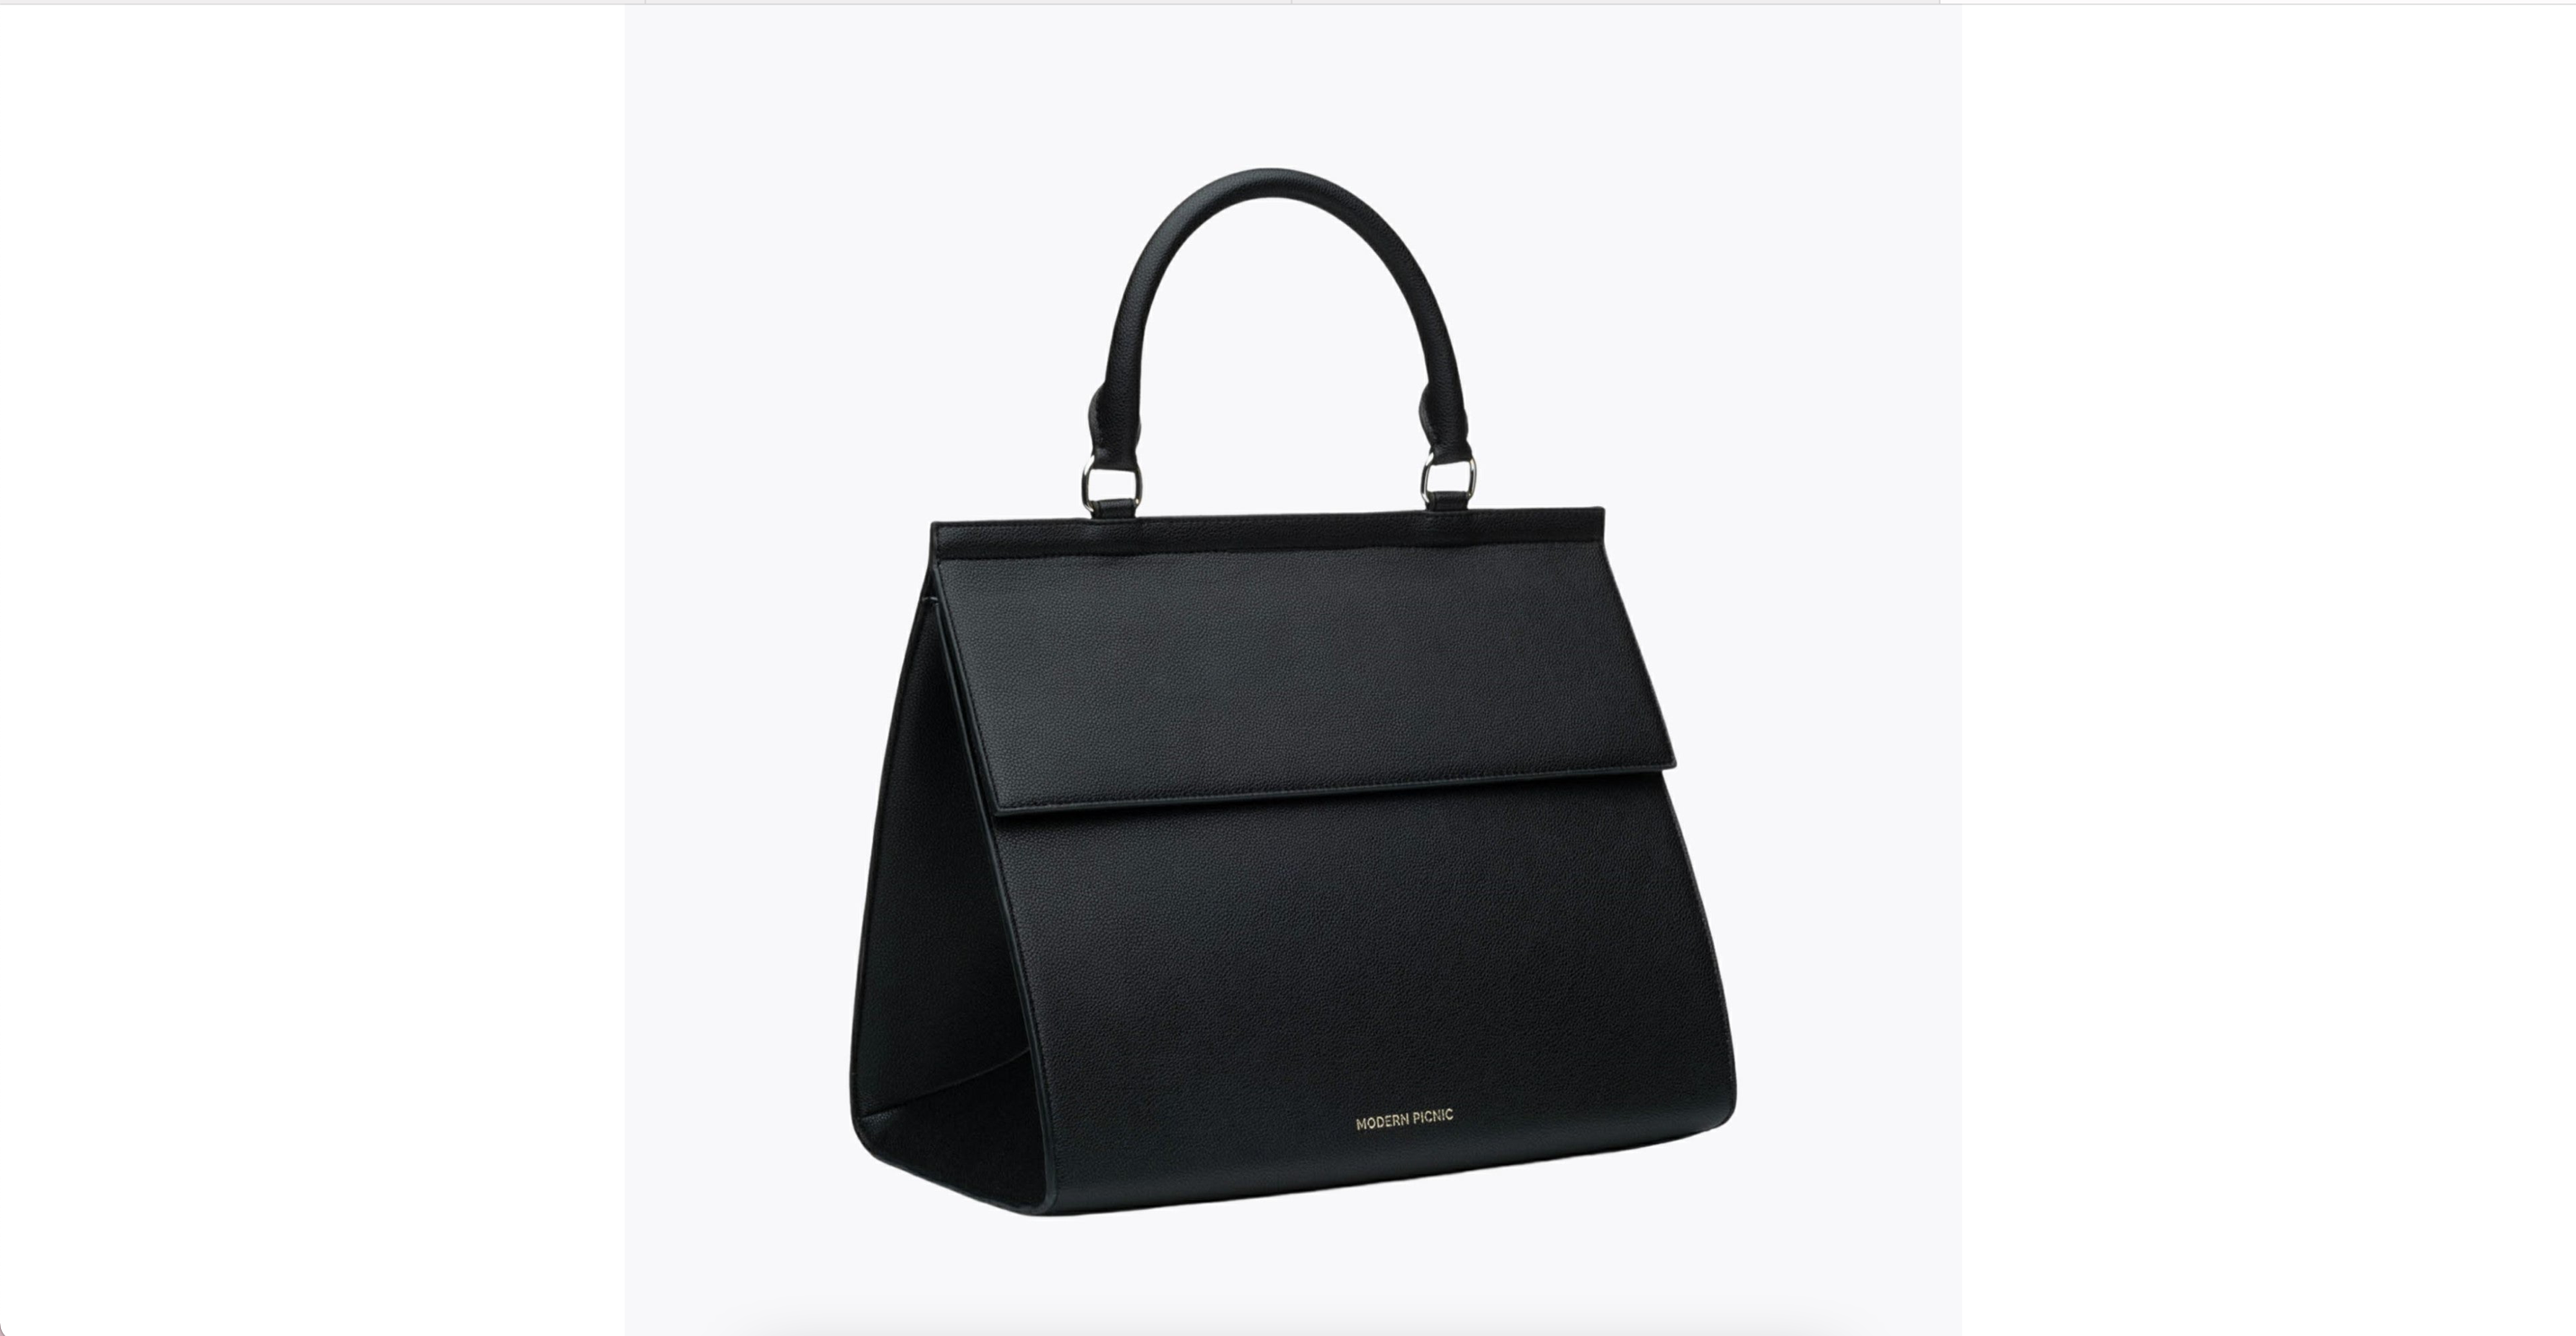 THE LUNCHER - BLACK  Designer lunch bags, Fashionable lunch bags, Women  lunch bag